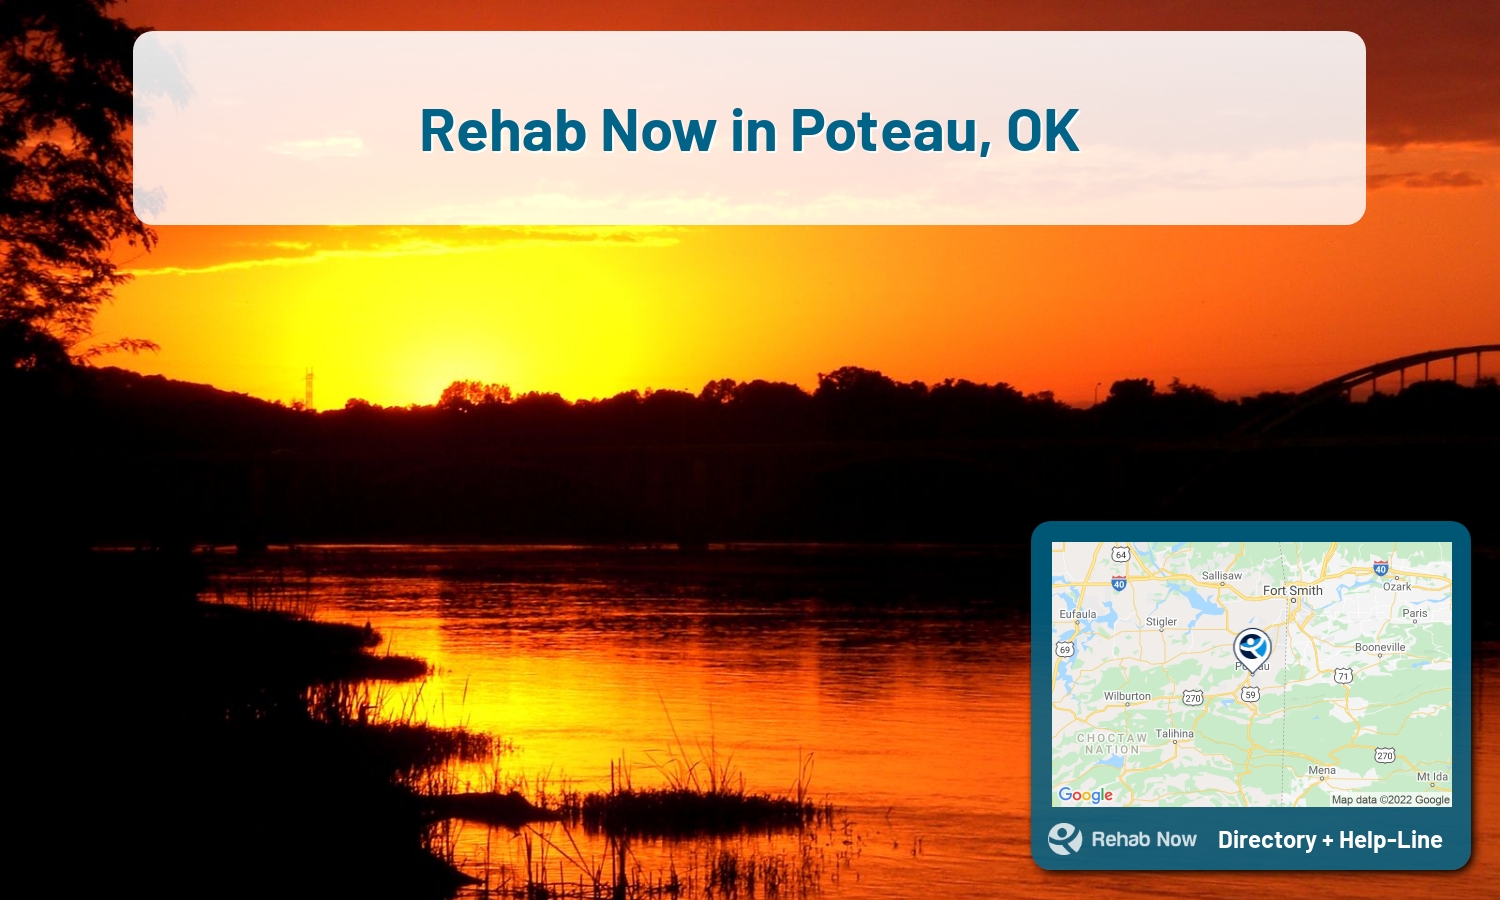 Poteau, OK Treatment Centers. Find drug rehab in Poteau, Oklahoma, or detox and treatment programs. Get the right help now!